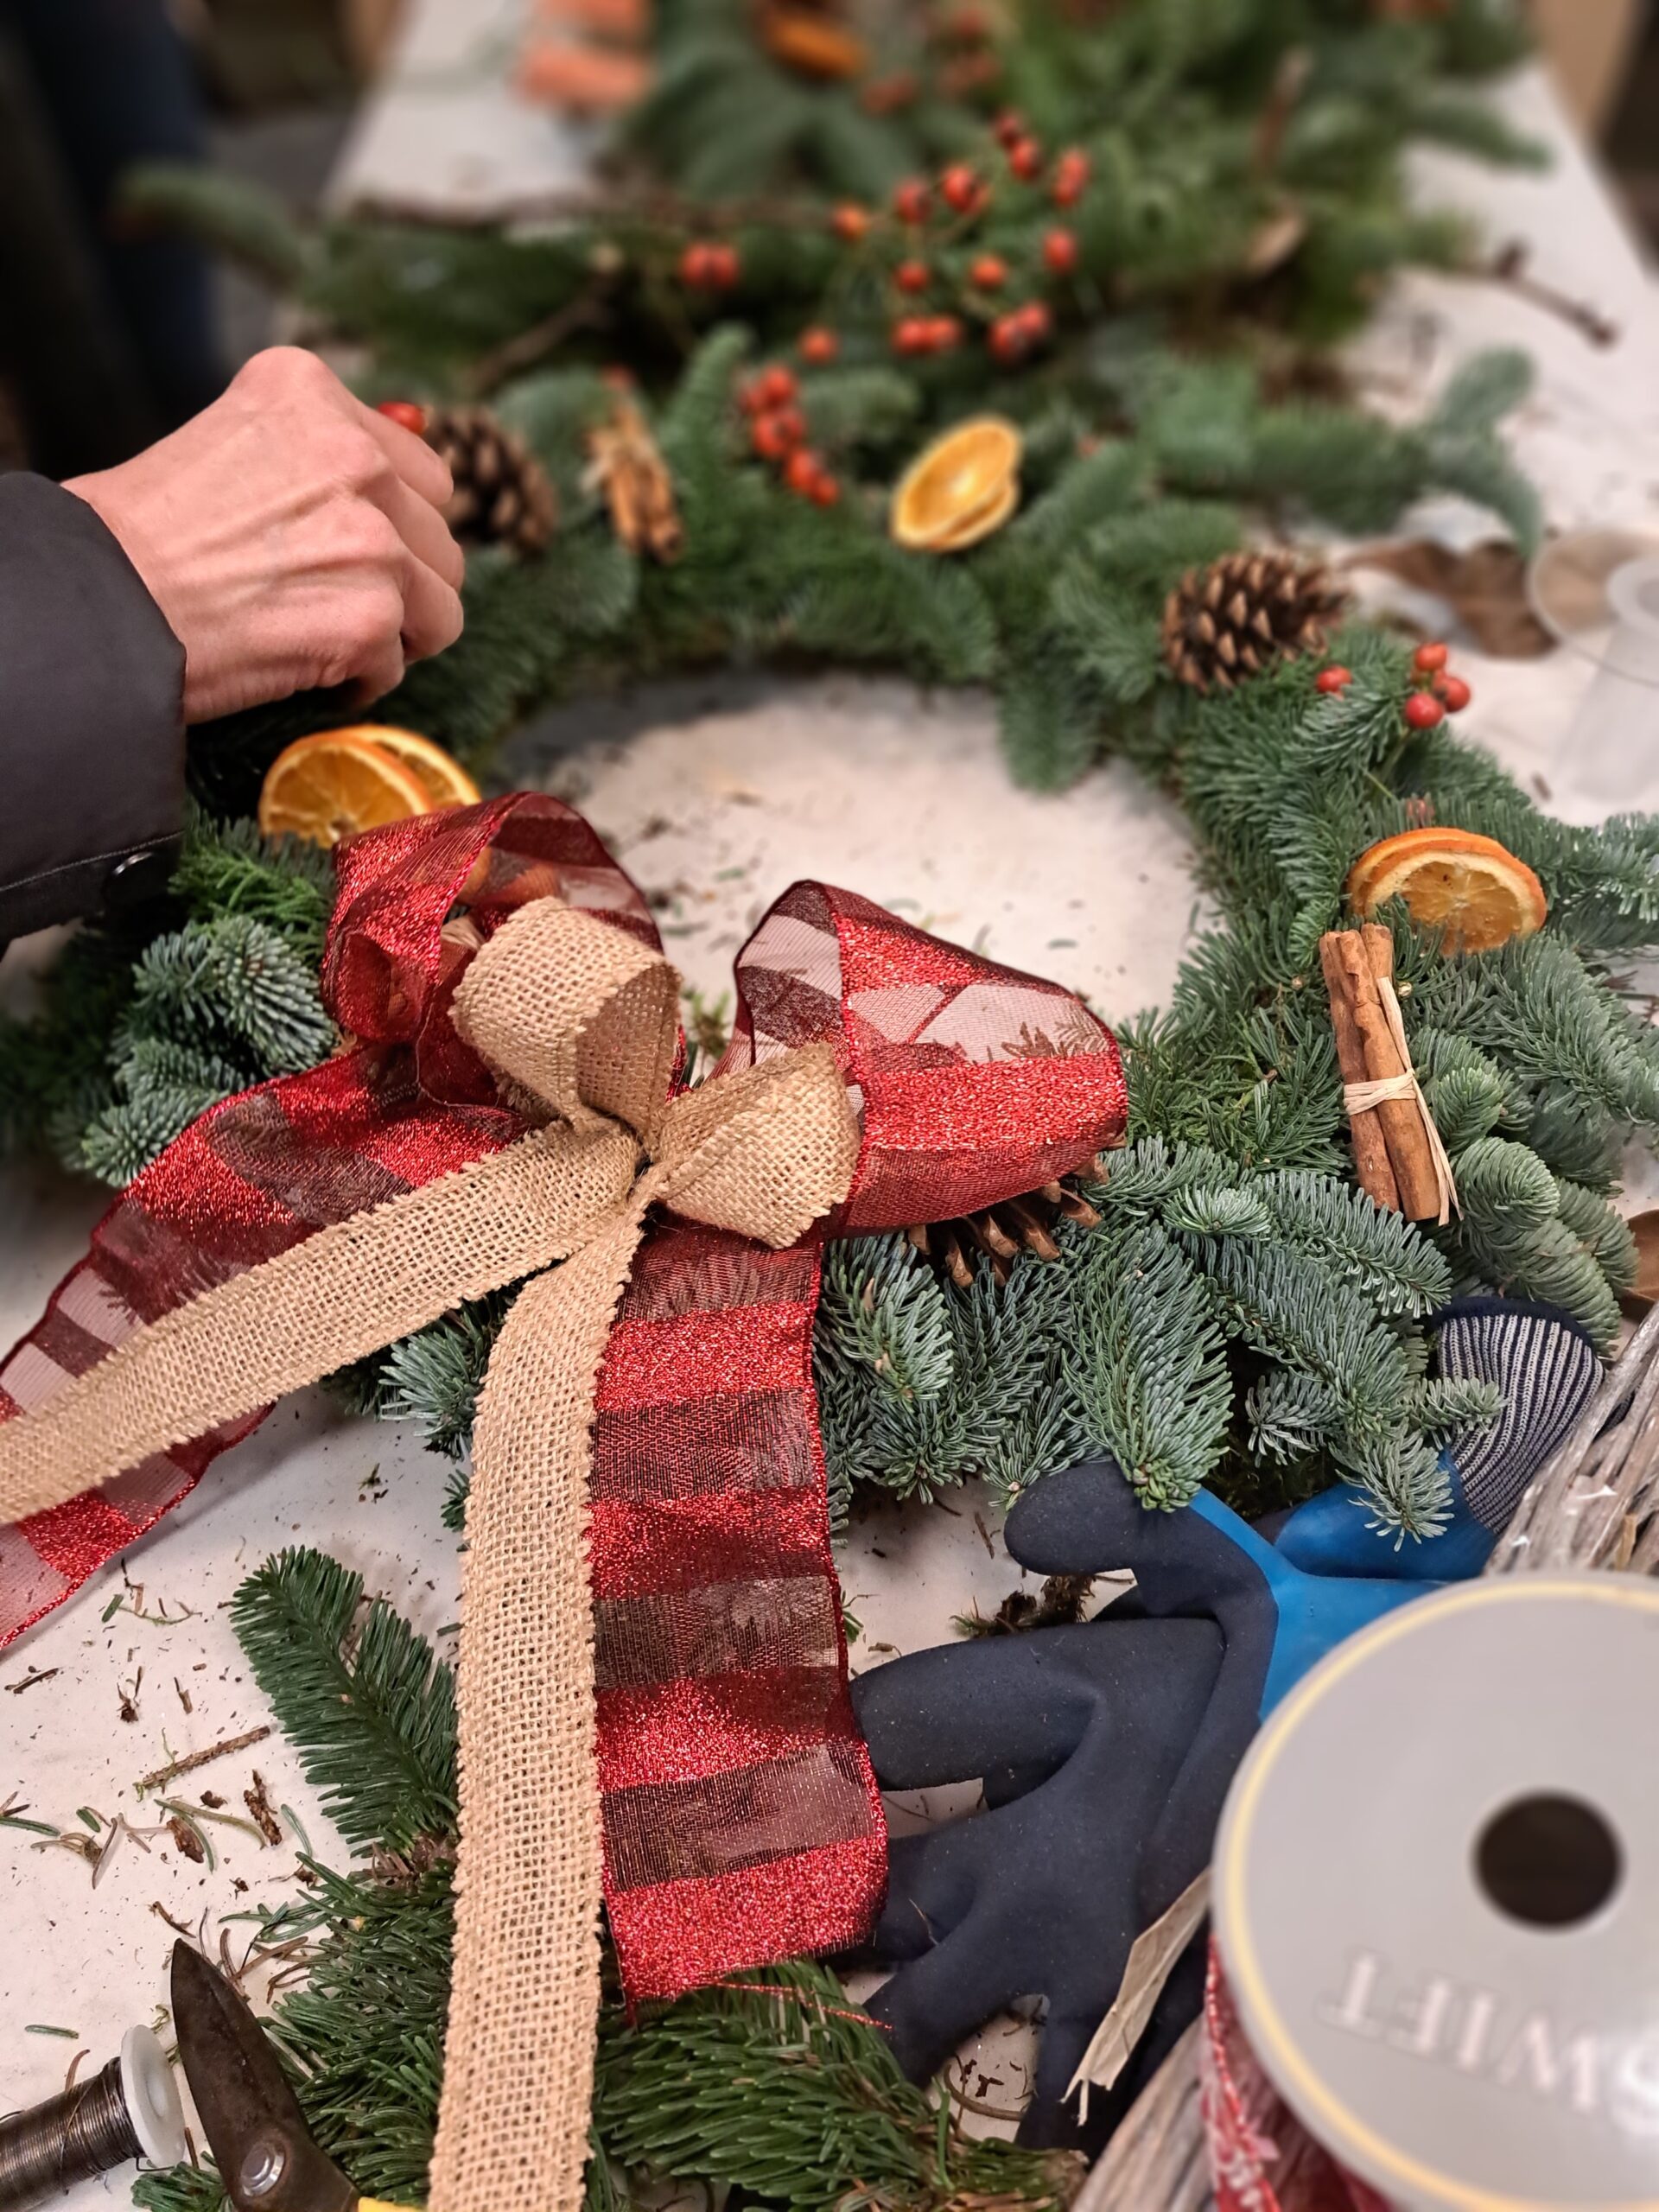 A christmas wreath being made, with blue spruce foliage forming the ring of the wreath, and a giant bow made up of red ribbon and jute twine. There are orange slices tied on to the wreath with red berries and pinecones, and lots of leaves and tools around the table.